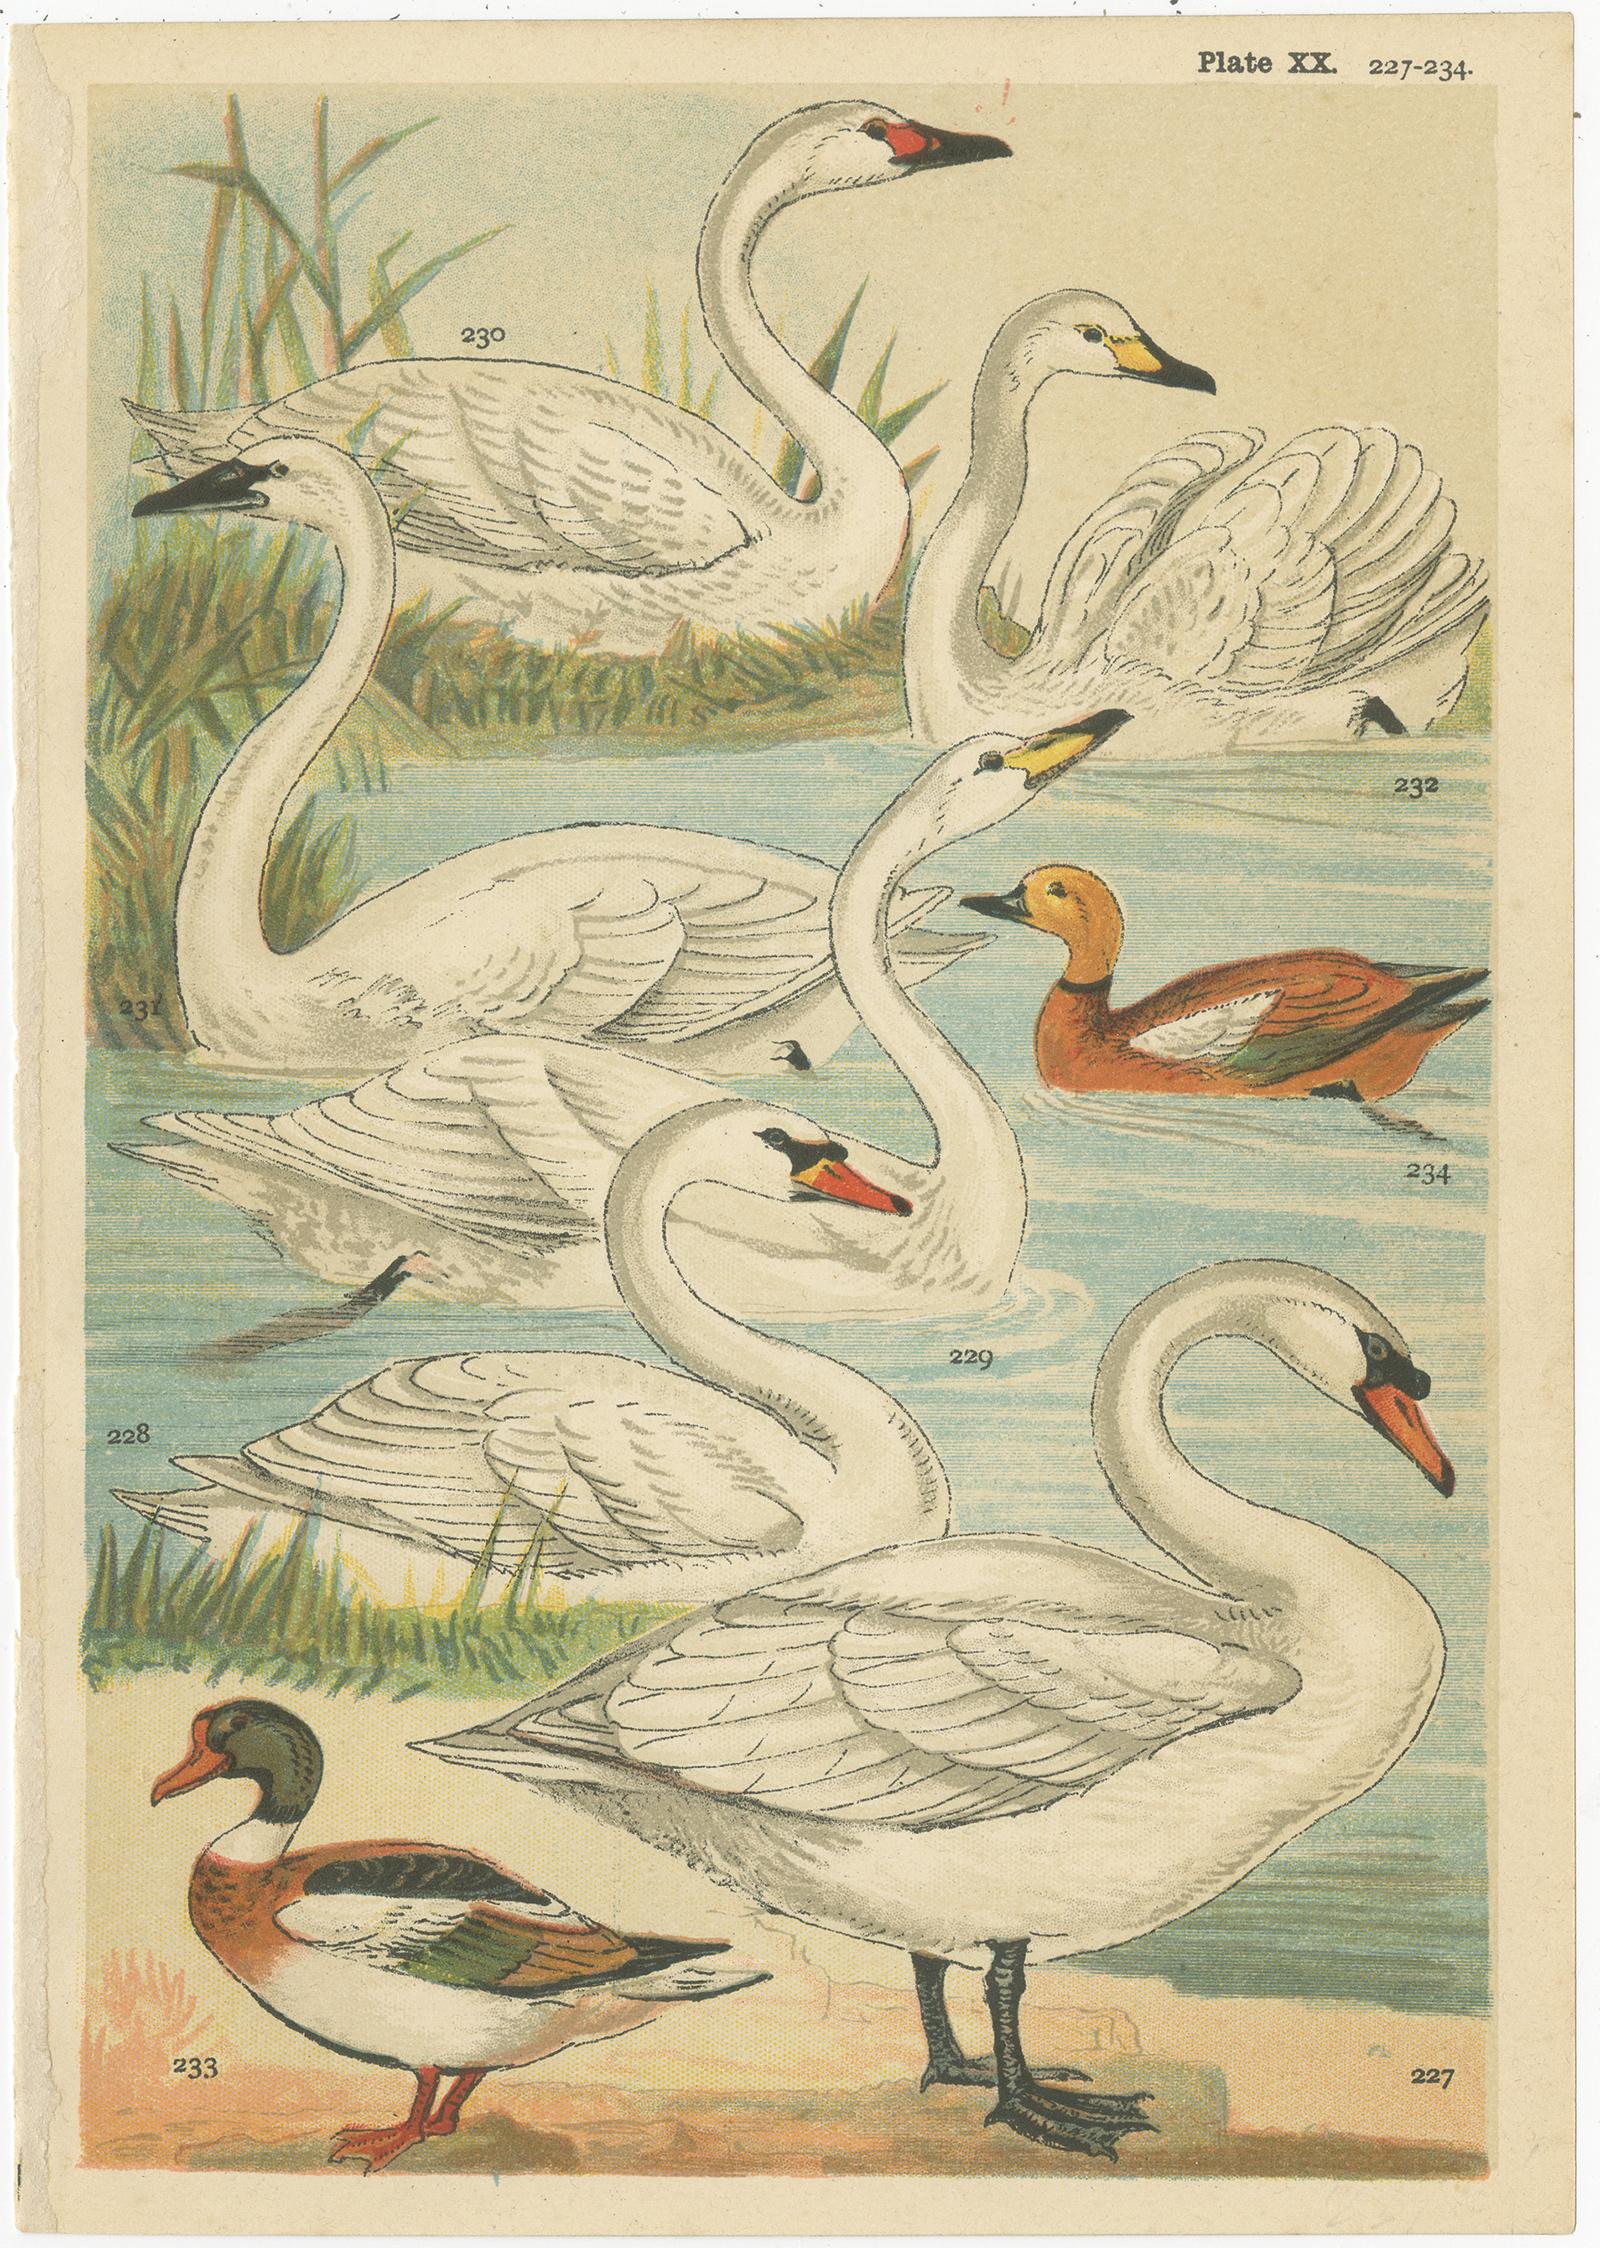 Set of 6 Antique Prints of various Waterfowl and Wading Birds by Gordon 'c.1900' For Sale 2